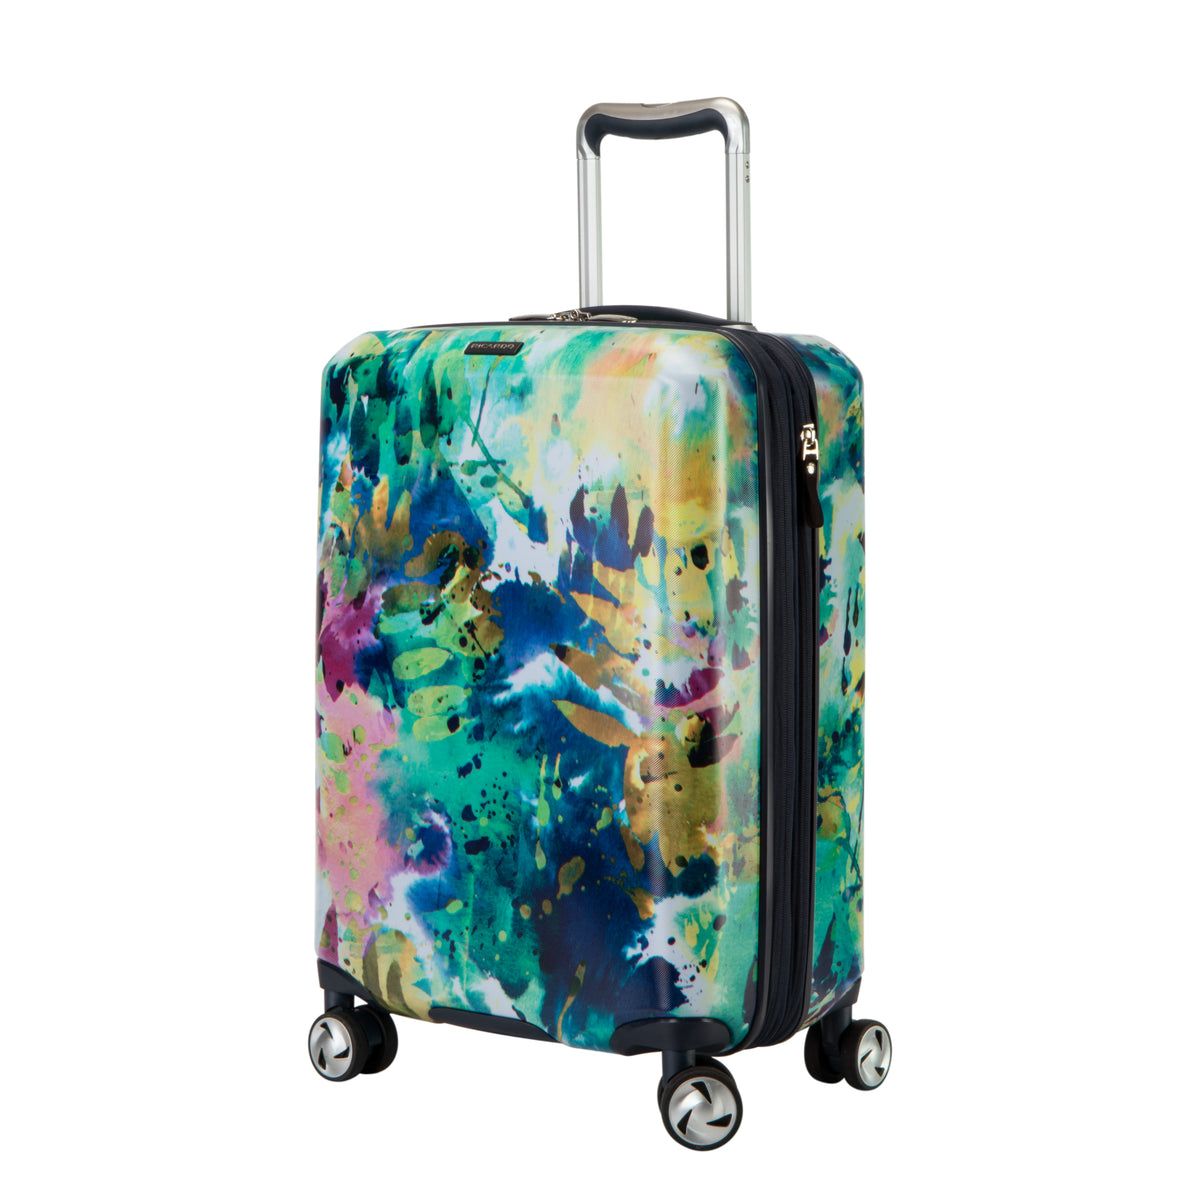 Beaumont Hardside Carry-On Suitcase